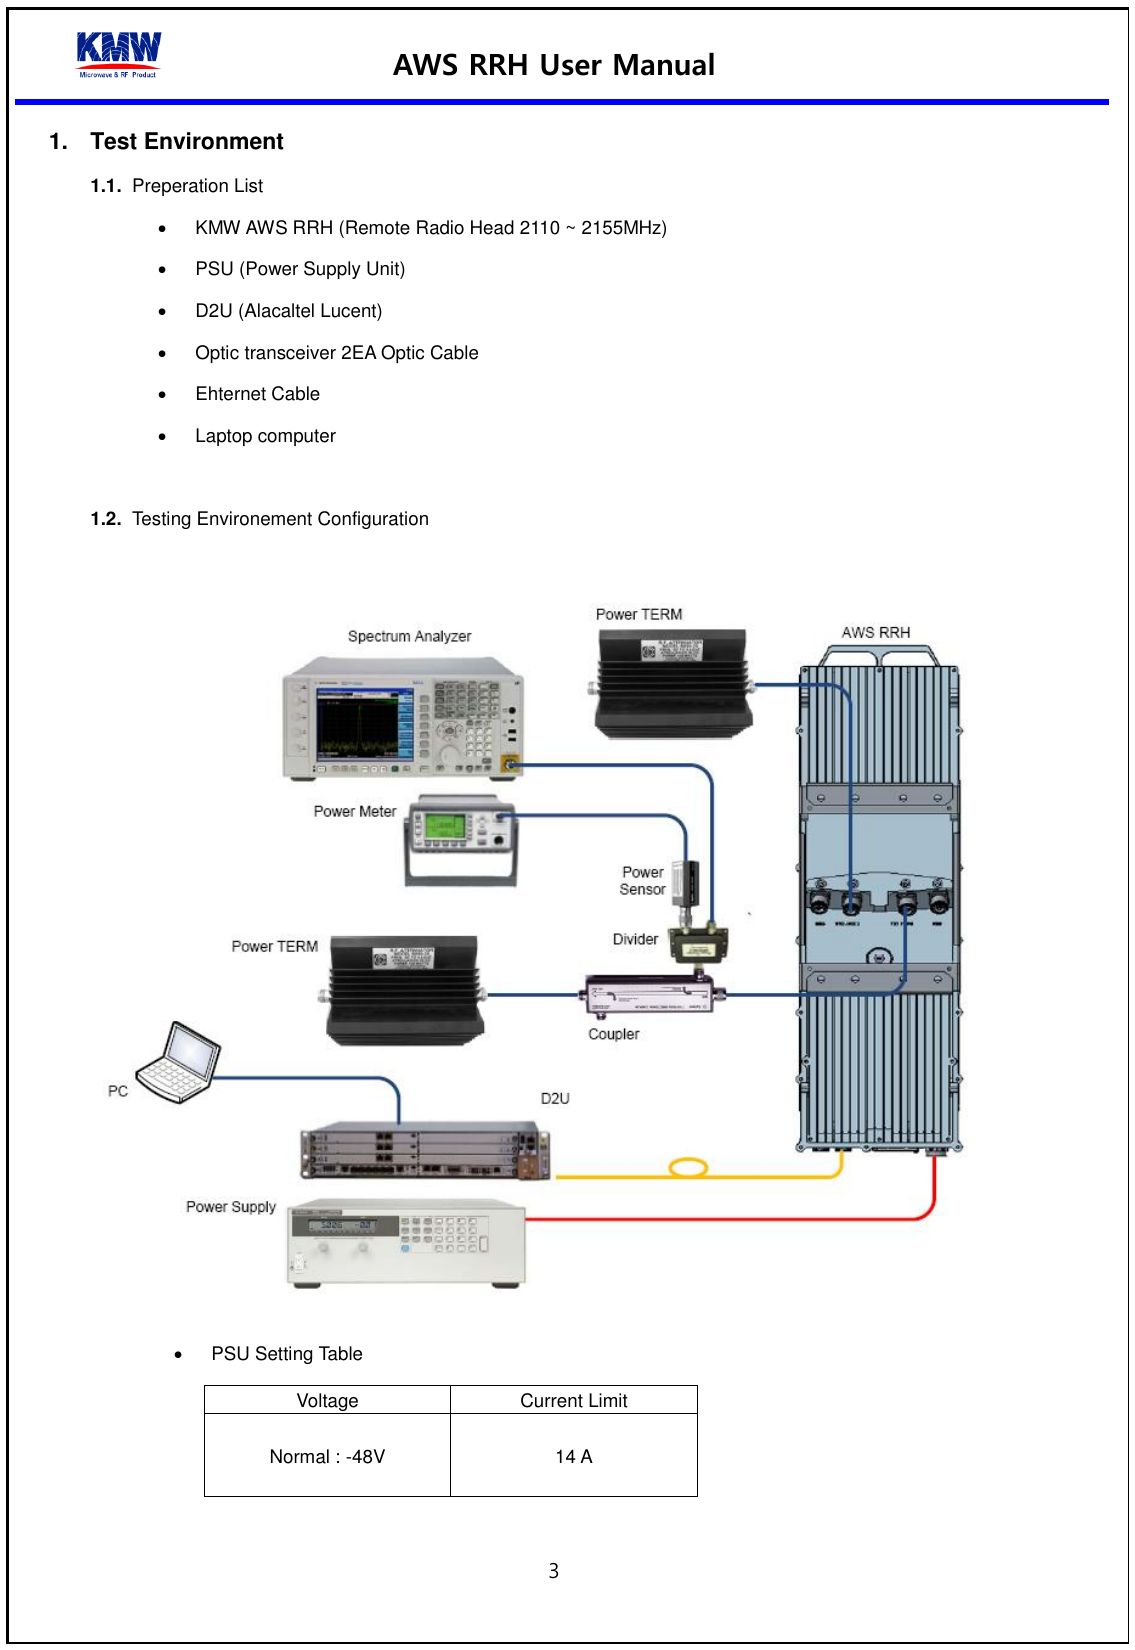 AWS RRH User Manual  3  1.  Test Environment   1.1.  Preperation List   KMW AWS RRH (Remote Radio Head 2110 ~ 2155MHz)   PSU (Power Supply Unit)  D2U (Alacaltel Lucent)   Optic transceiver 2EA Optic Cable   Ehternet Cable   Laptop computer  1.2.  Testing Environement Configuration       PSU Setting Table Voltage Current Limit Normal : -48V 14 A  